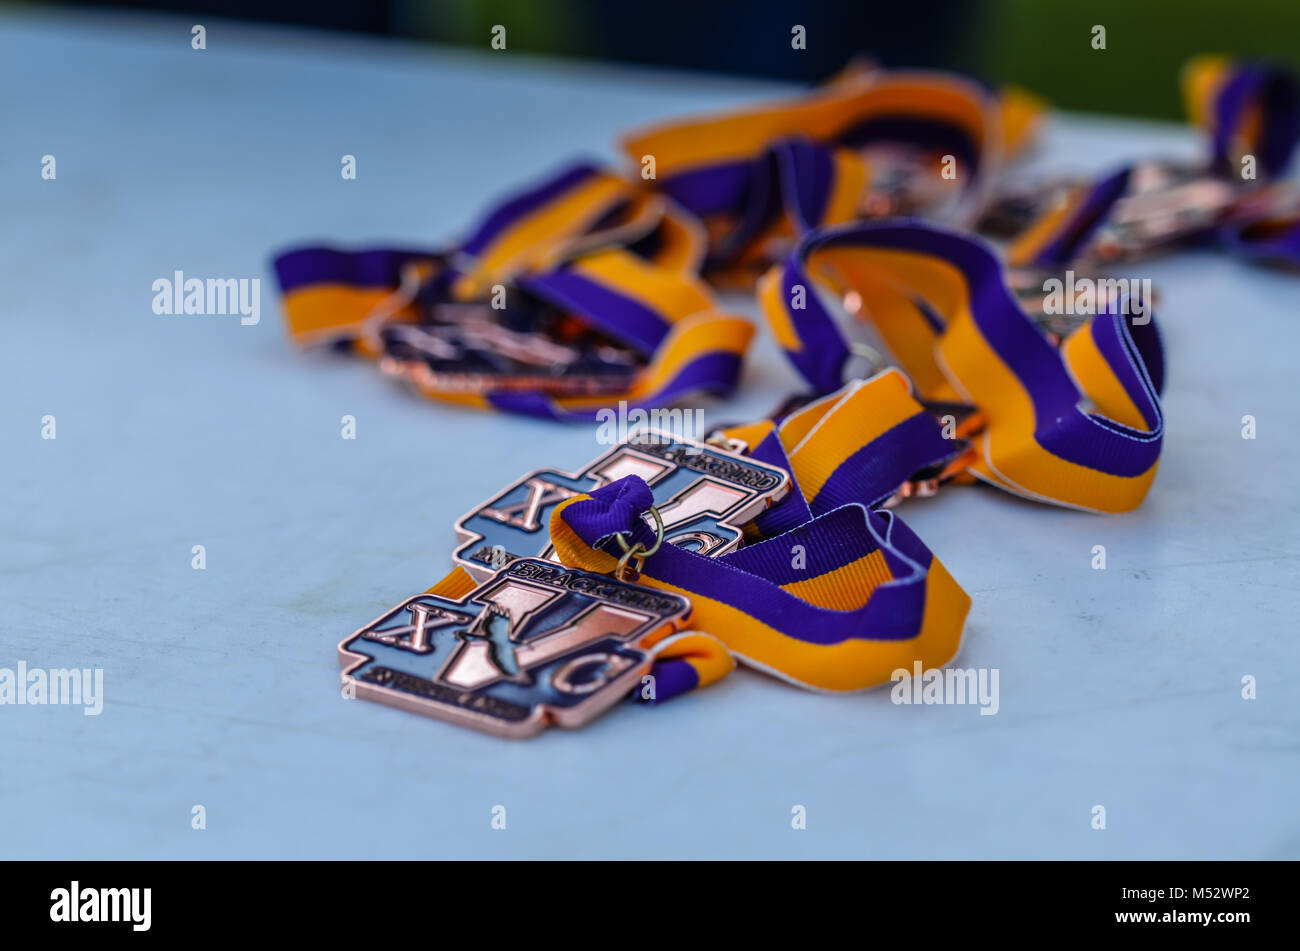 Bronze cross country medals on purple and gold ribbons. Stock Photo